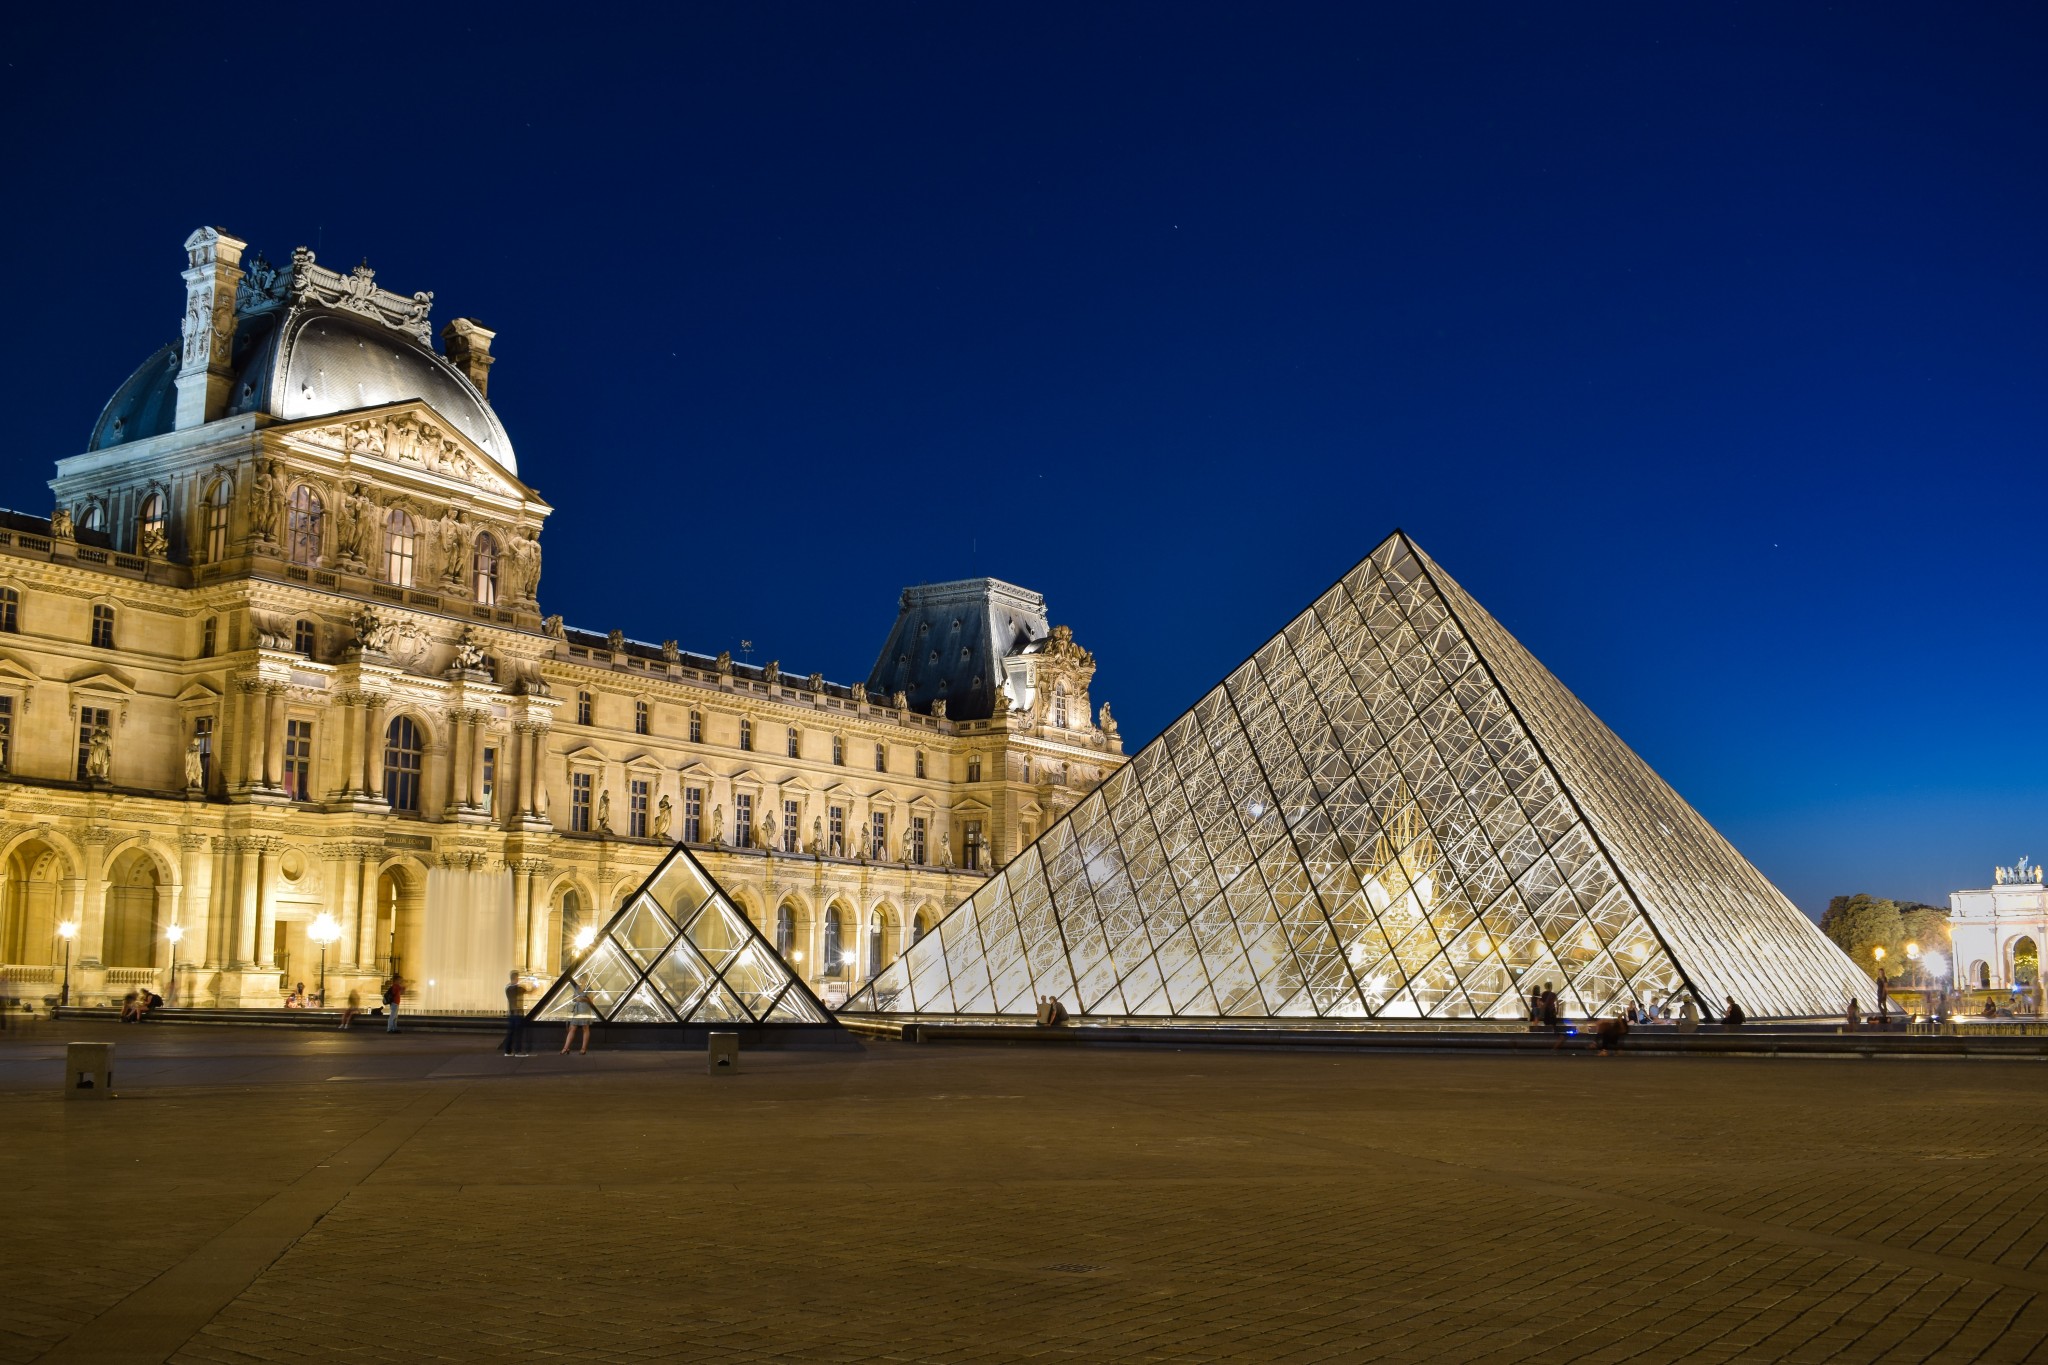 After longtime closure, the Louvre’s entire art collection can be seen from your fingertips.